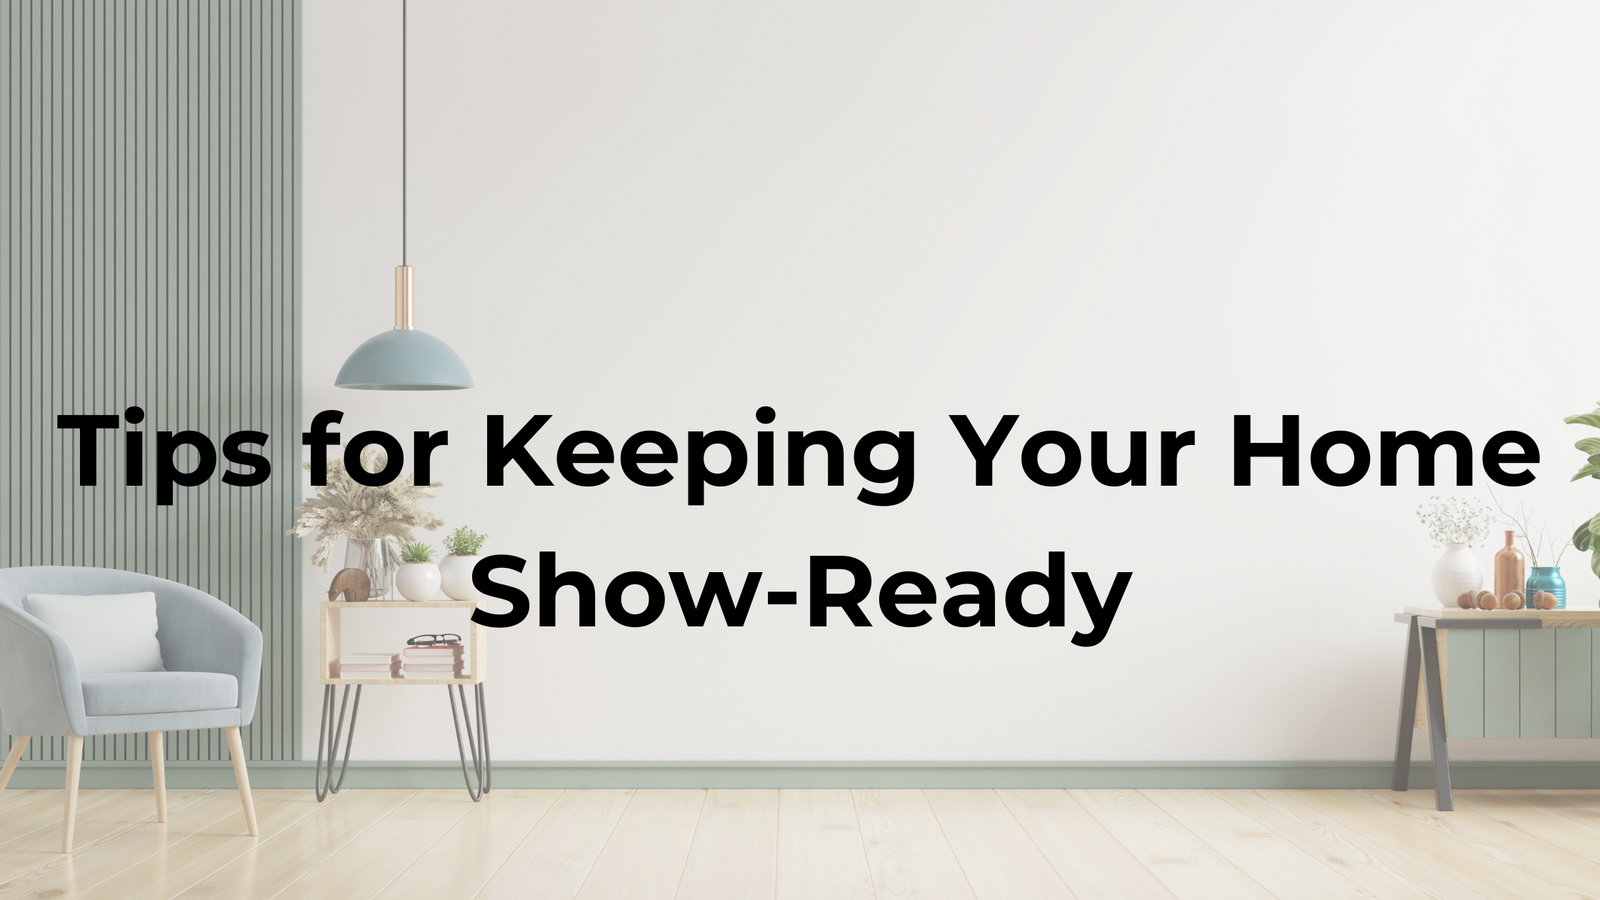 Tips for Keeping Your Home Show-Ready